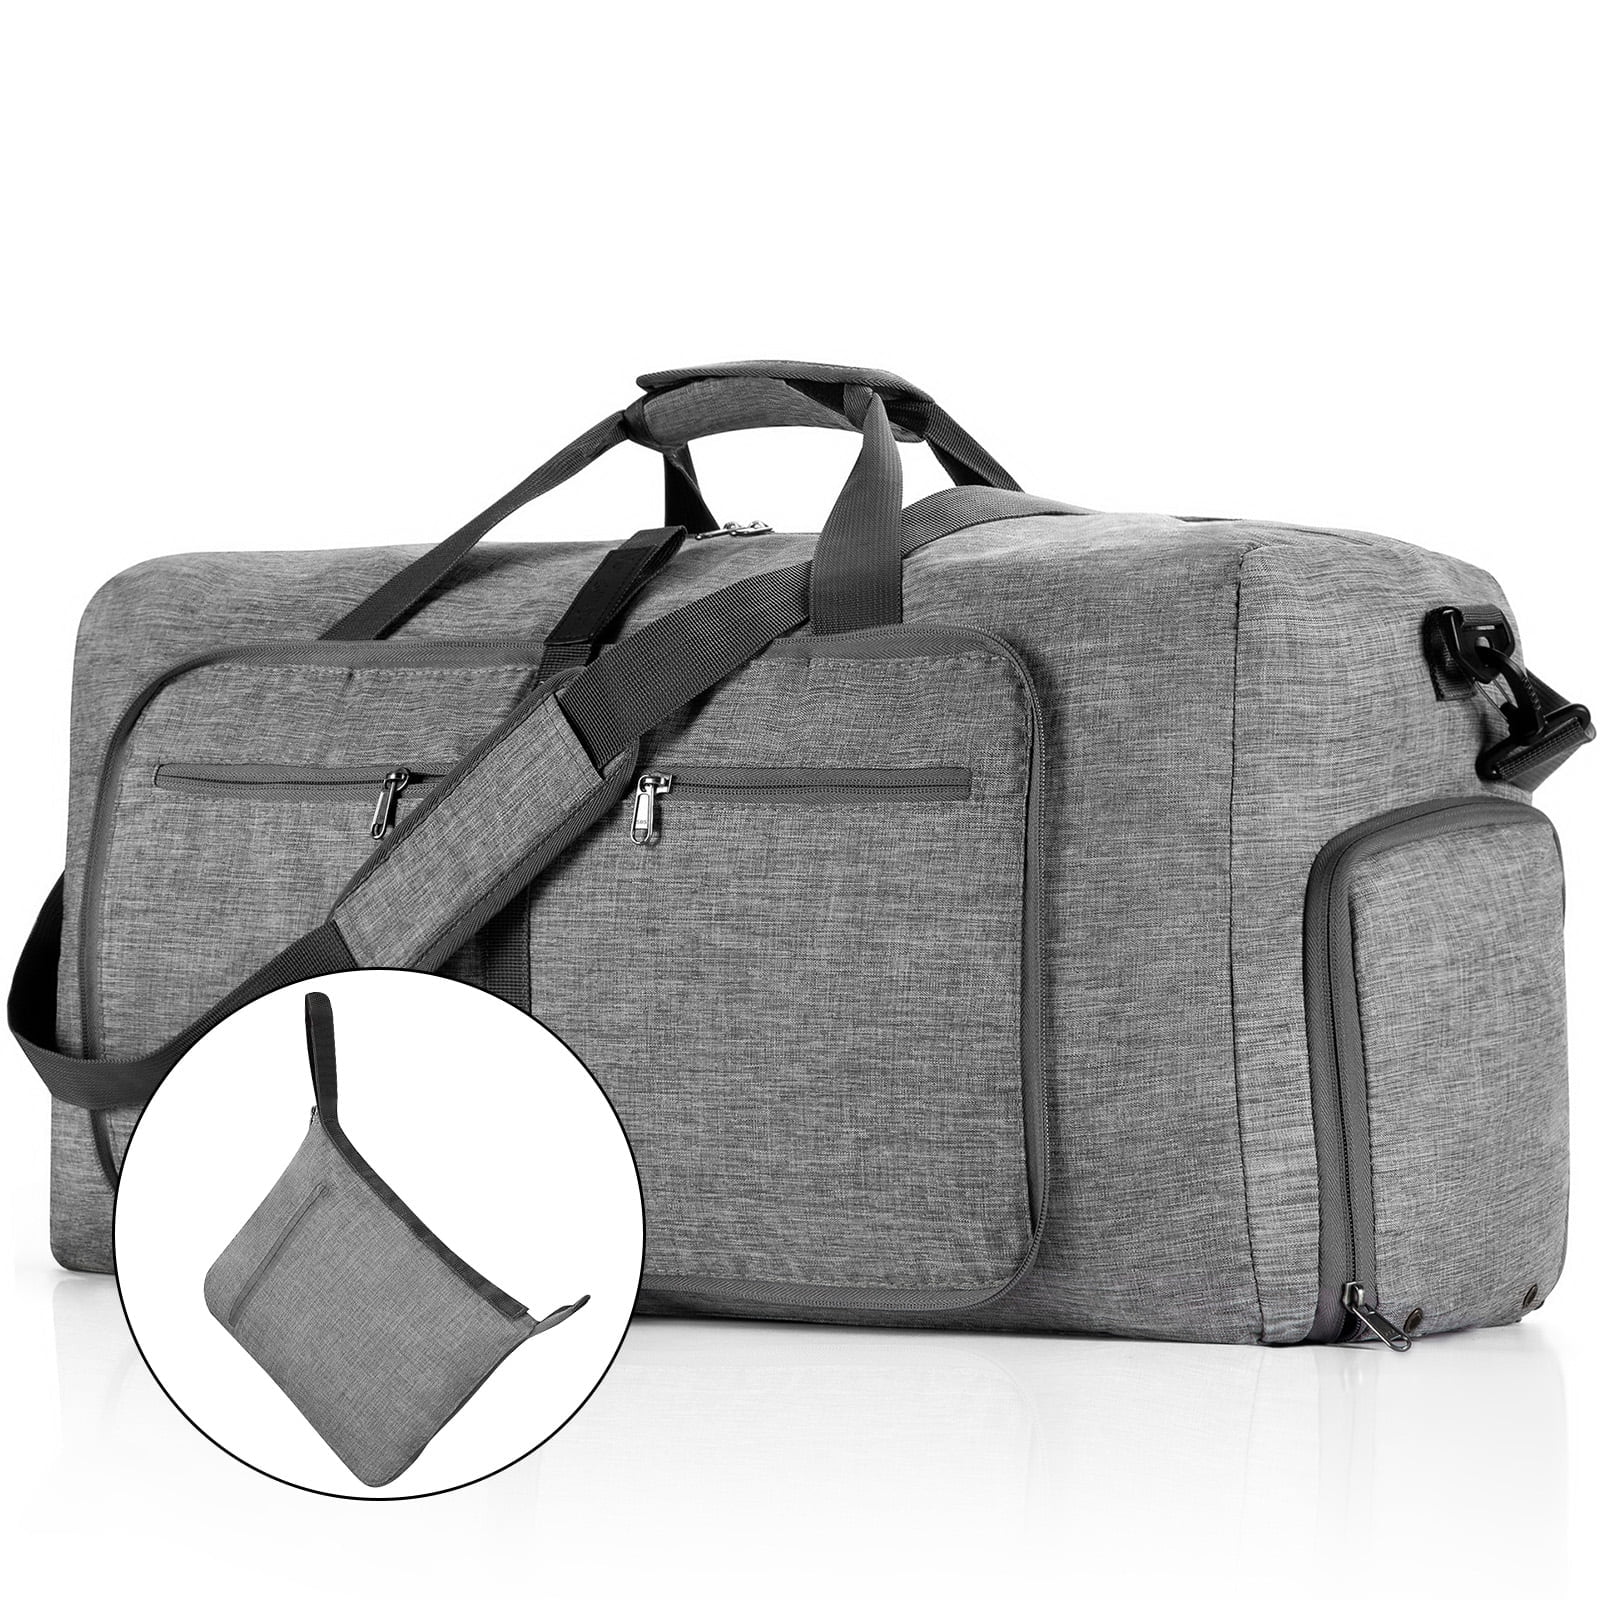  Overnight Bags for Women Weekender Travel Duffle Bag Carry on  Bags for Airplanes with Wet Shoes Compartment Men Leather Tote Gym Duffel  Bags for Traveling Business Travel Essential